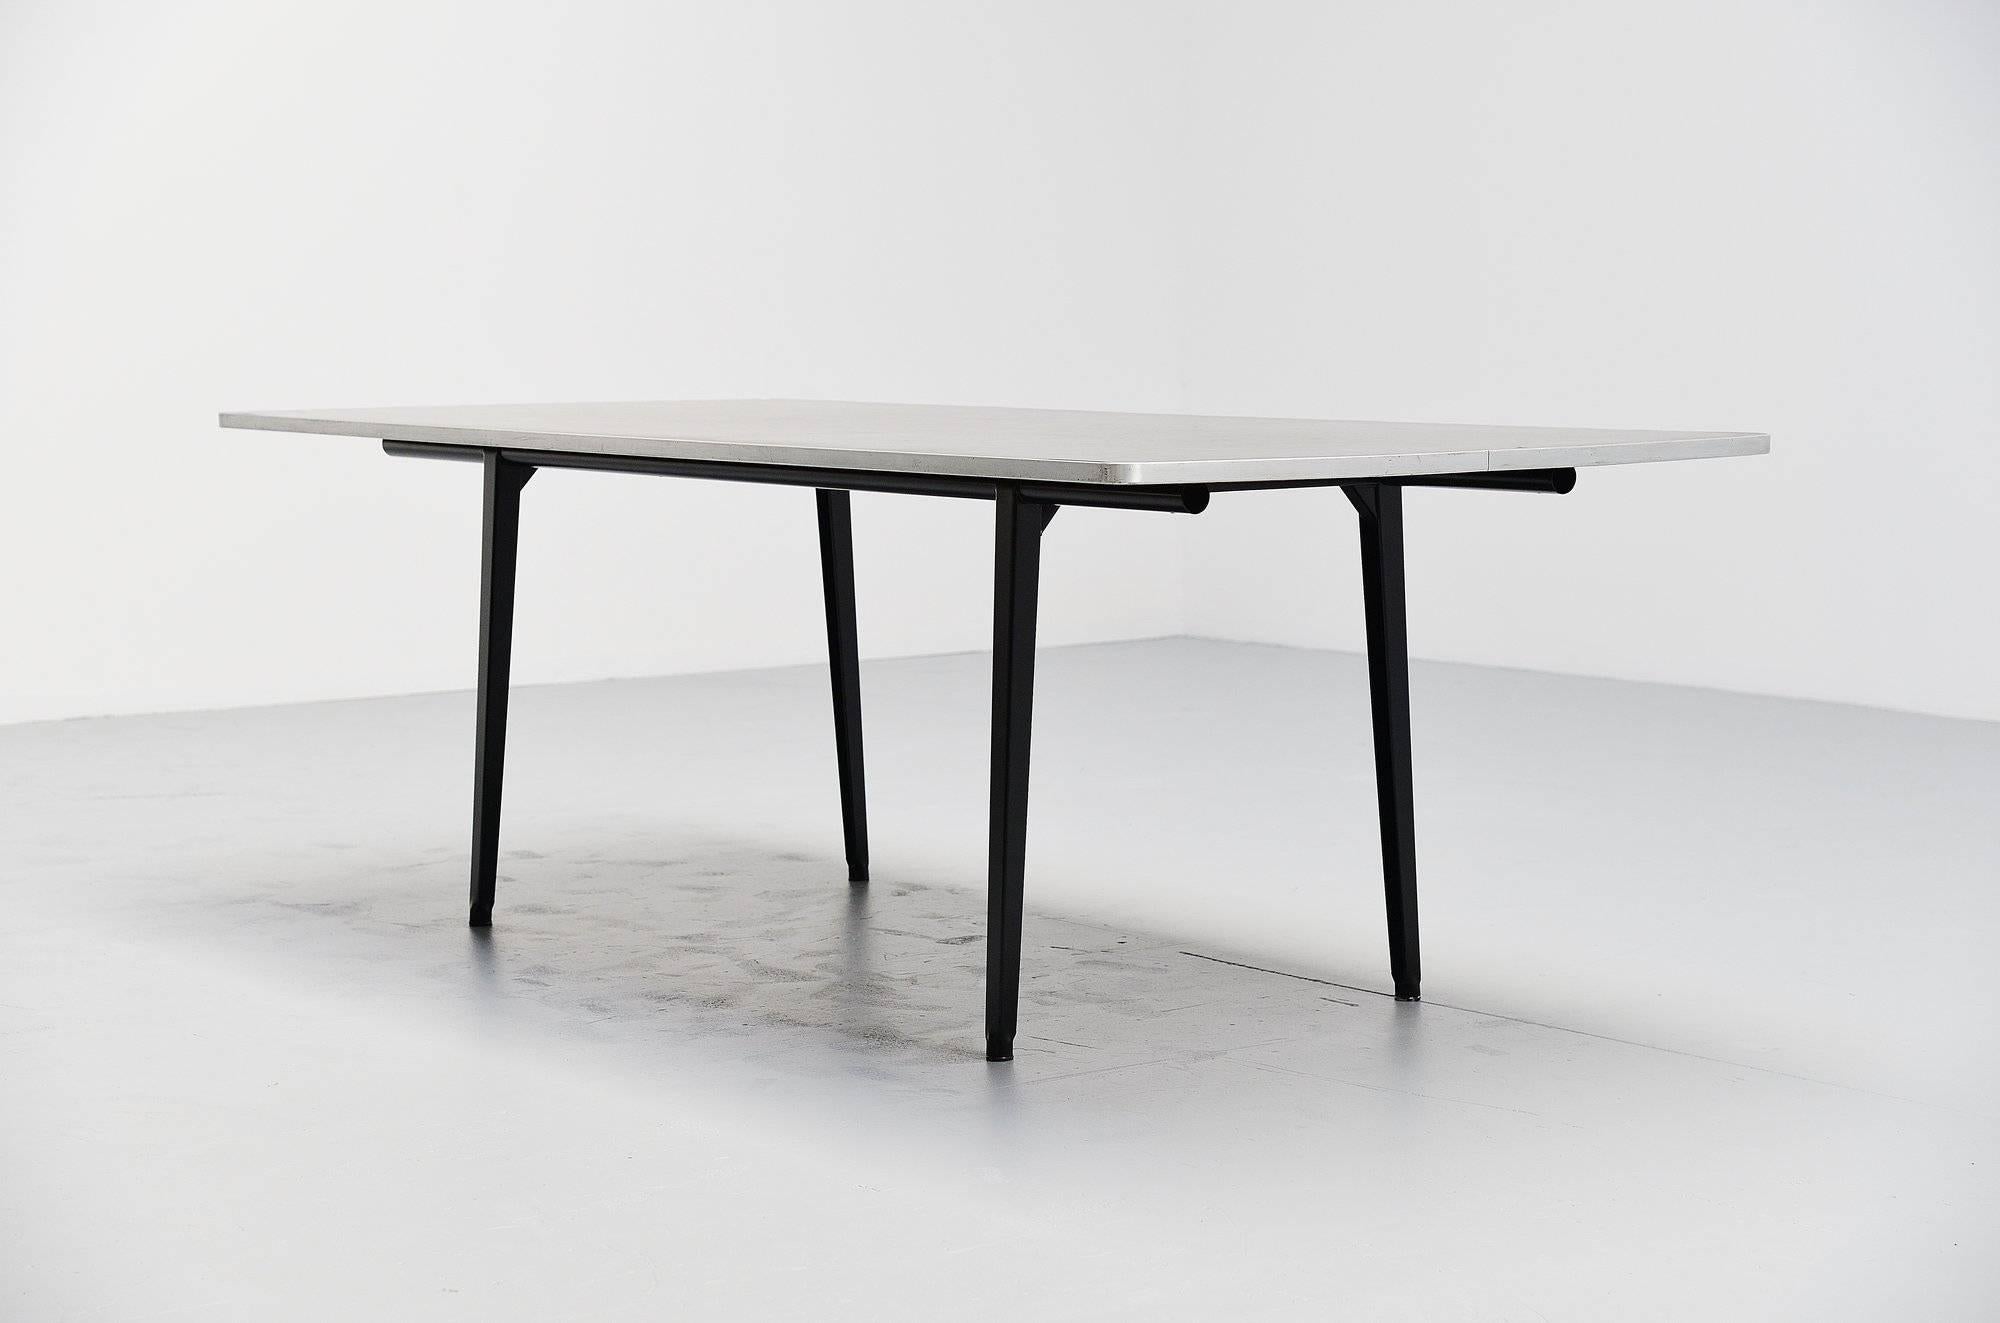 Nice and rare Industrial table designed by Friso Kramer for Ahrend de Cirkel, Holland, 1955. This example is from March 1962, stamped at the bottom of the table top. This table is the largest version made, 240 cm. This is the nicest version with